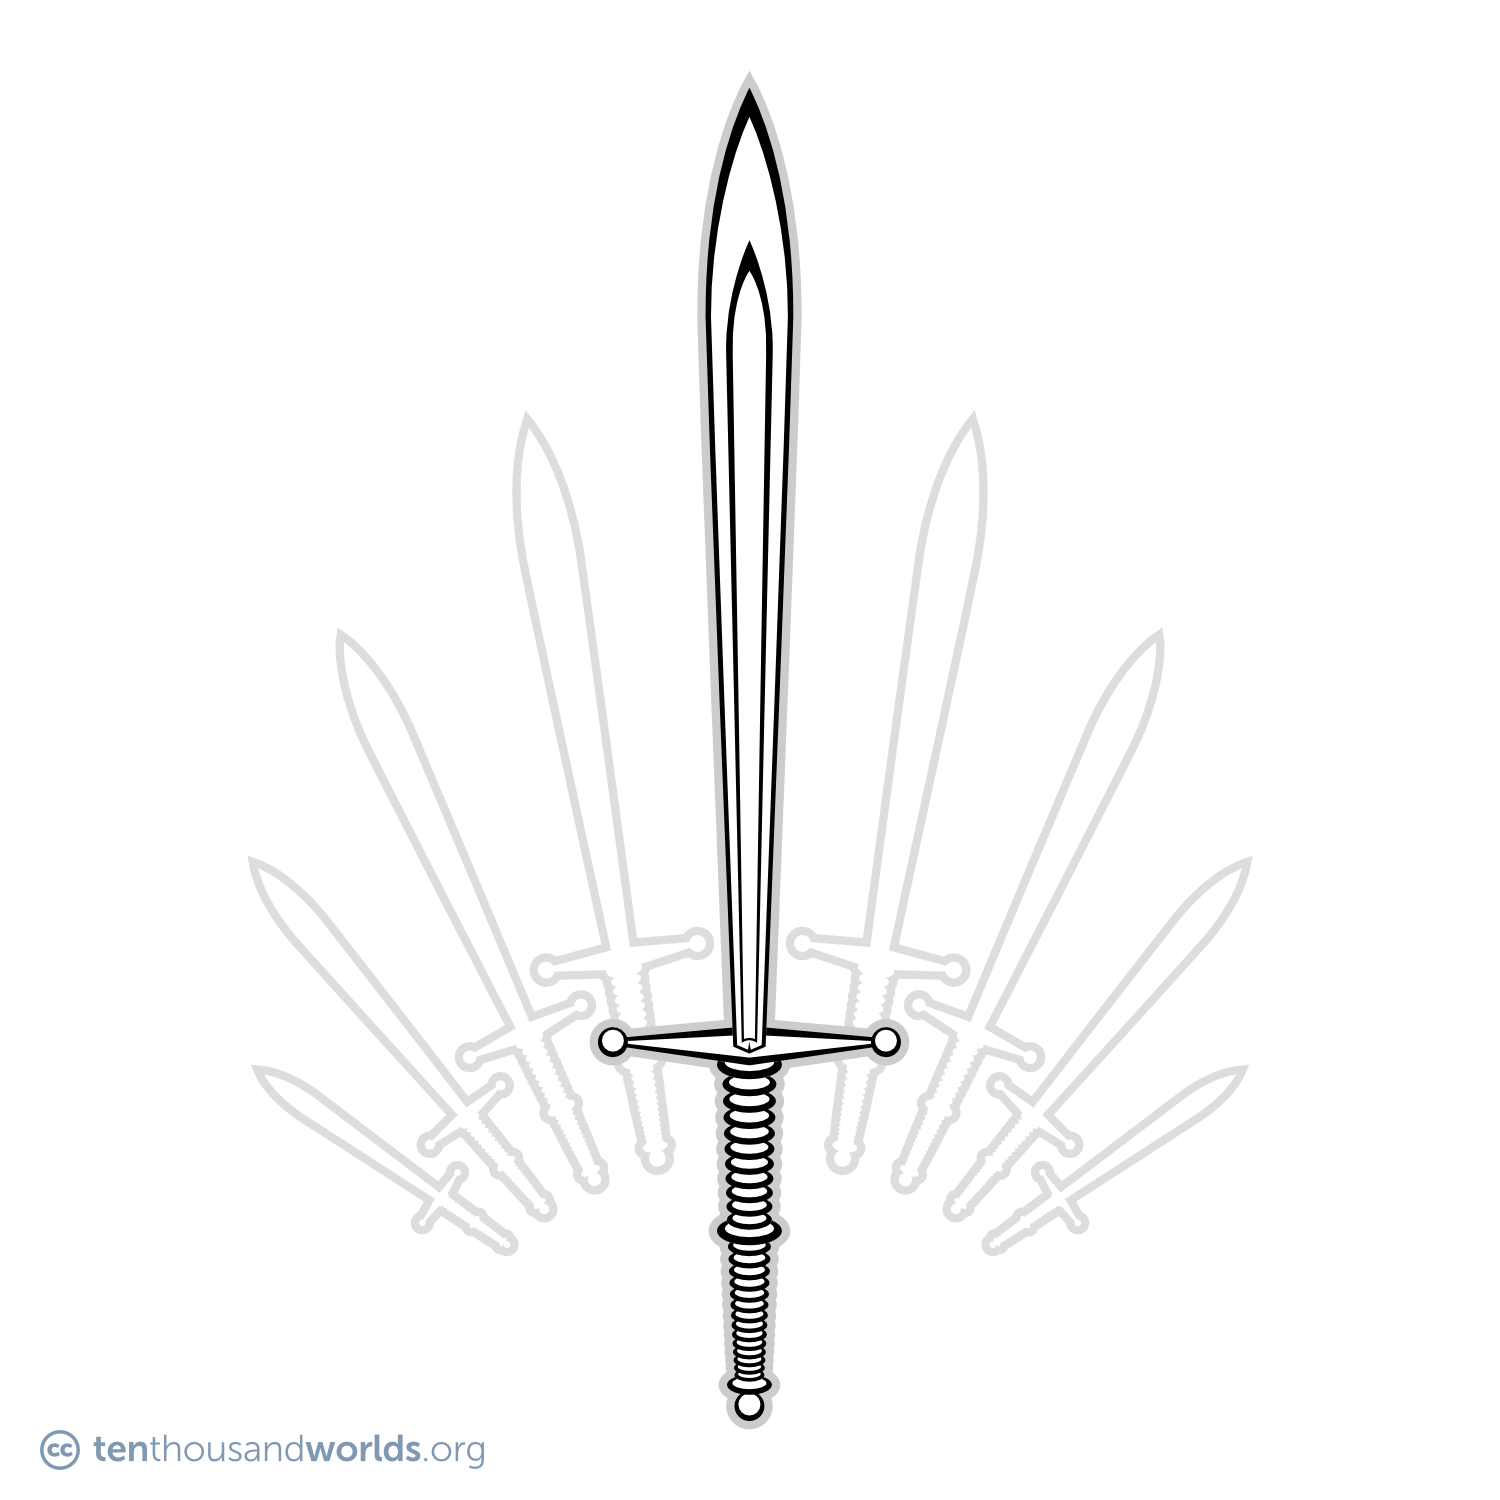 An ink outline of a sleek, simple two-handed sword with a guard and pommel that end in spheres, pointing upward. Behind it, the silhouettes of eight other swords fall away to both sides in an arc.